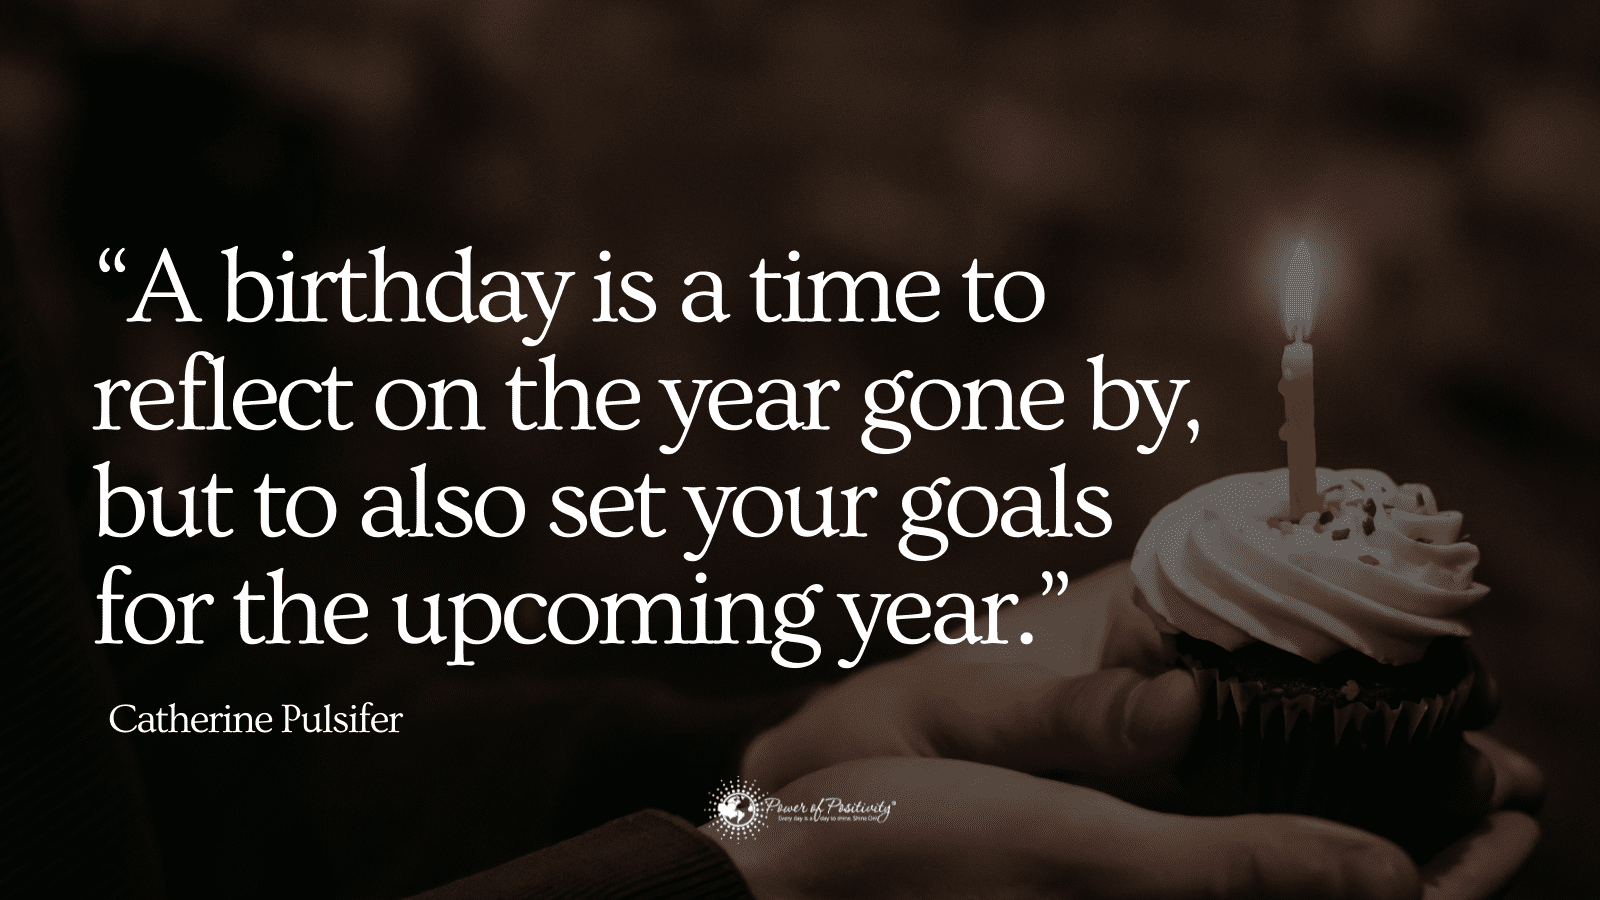 20 Birthday Quotes to Help Celebrate The Special Day